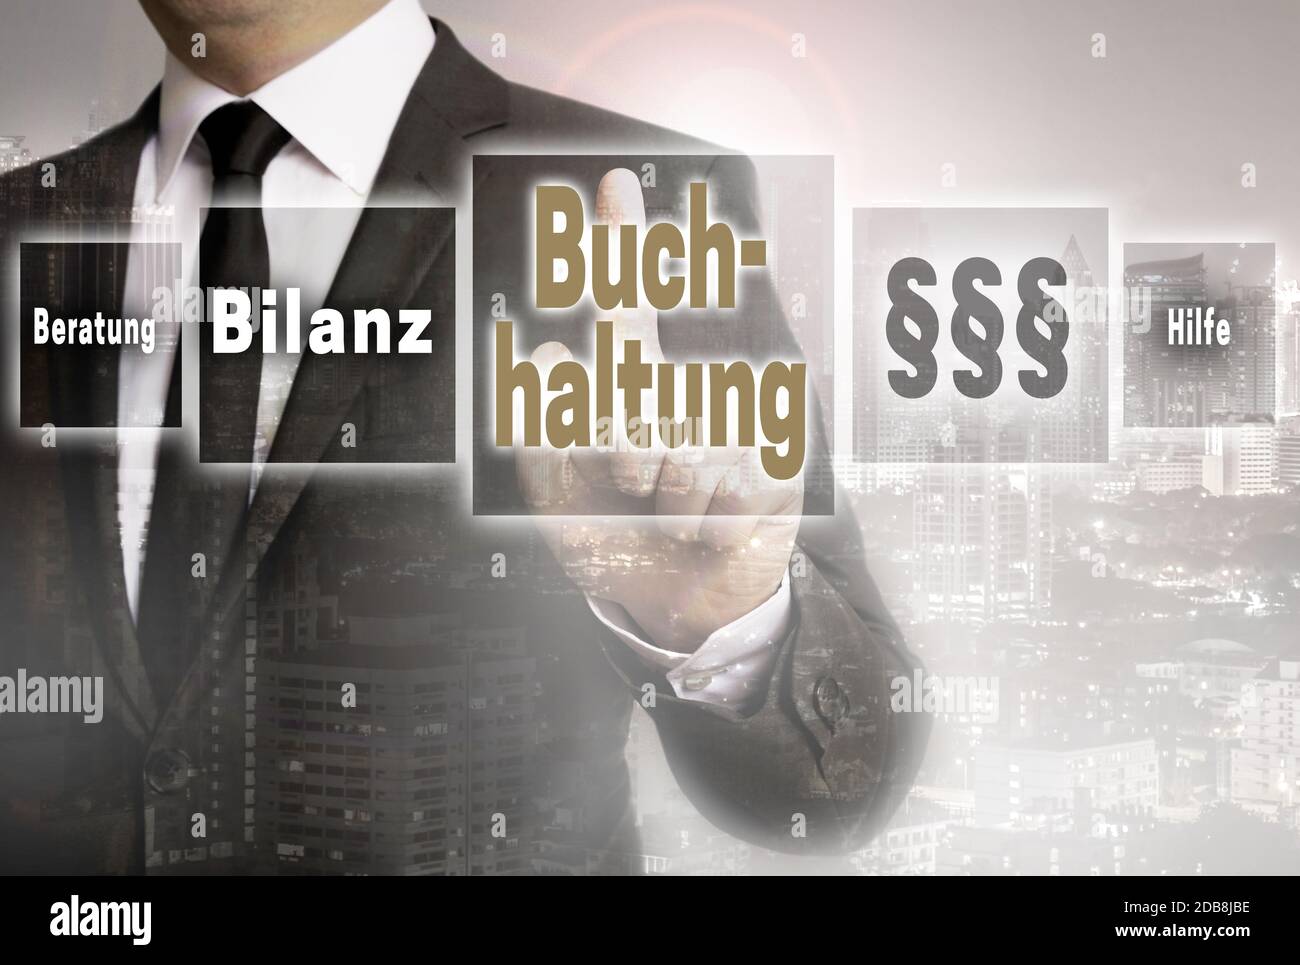 Buchhaltung (in german Accounting, Help, avice, end result) businessman with city background concept. Stock Photo